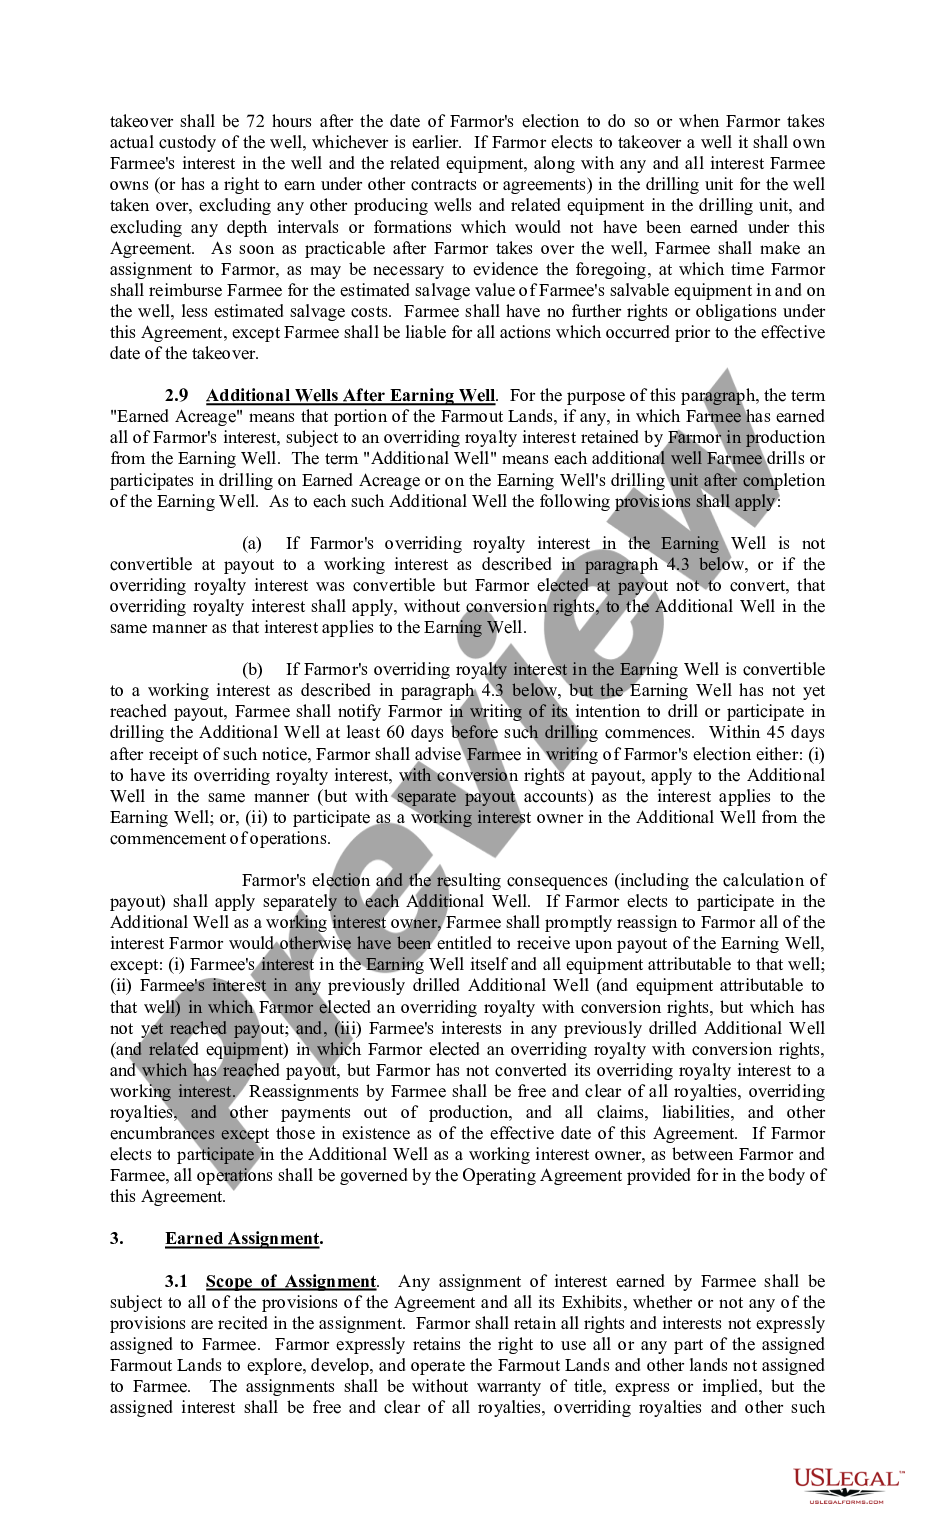 page 8 Farmout Agreement Providing For Multiple Wells with Production Required to Earn An Assignment preview